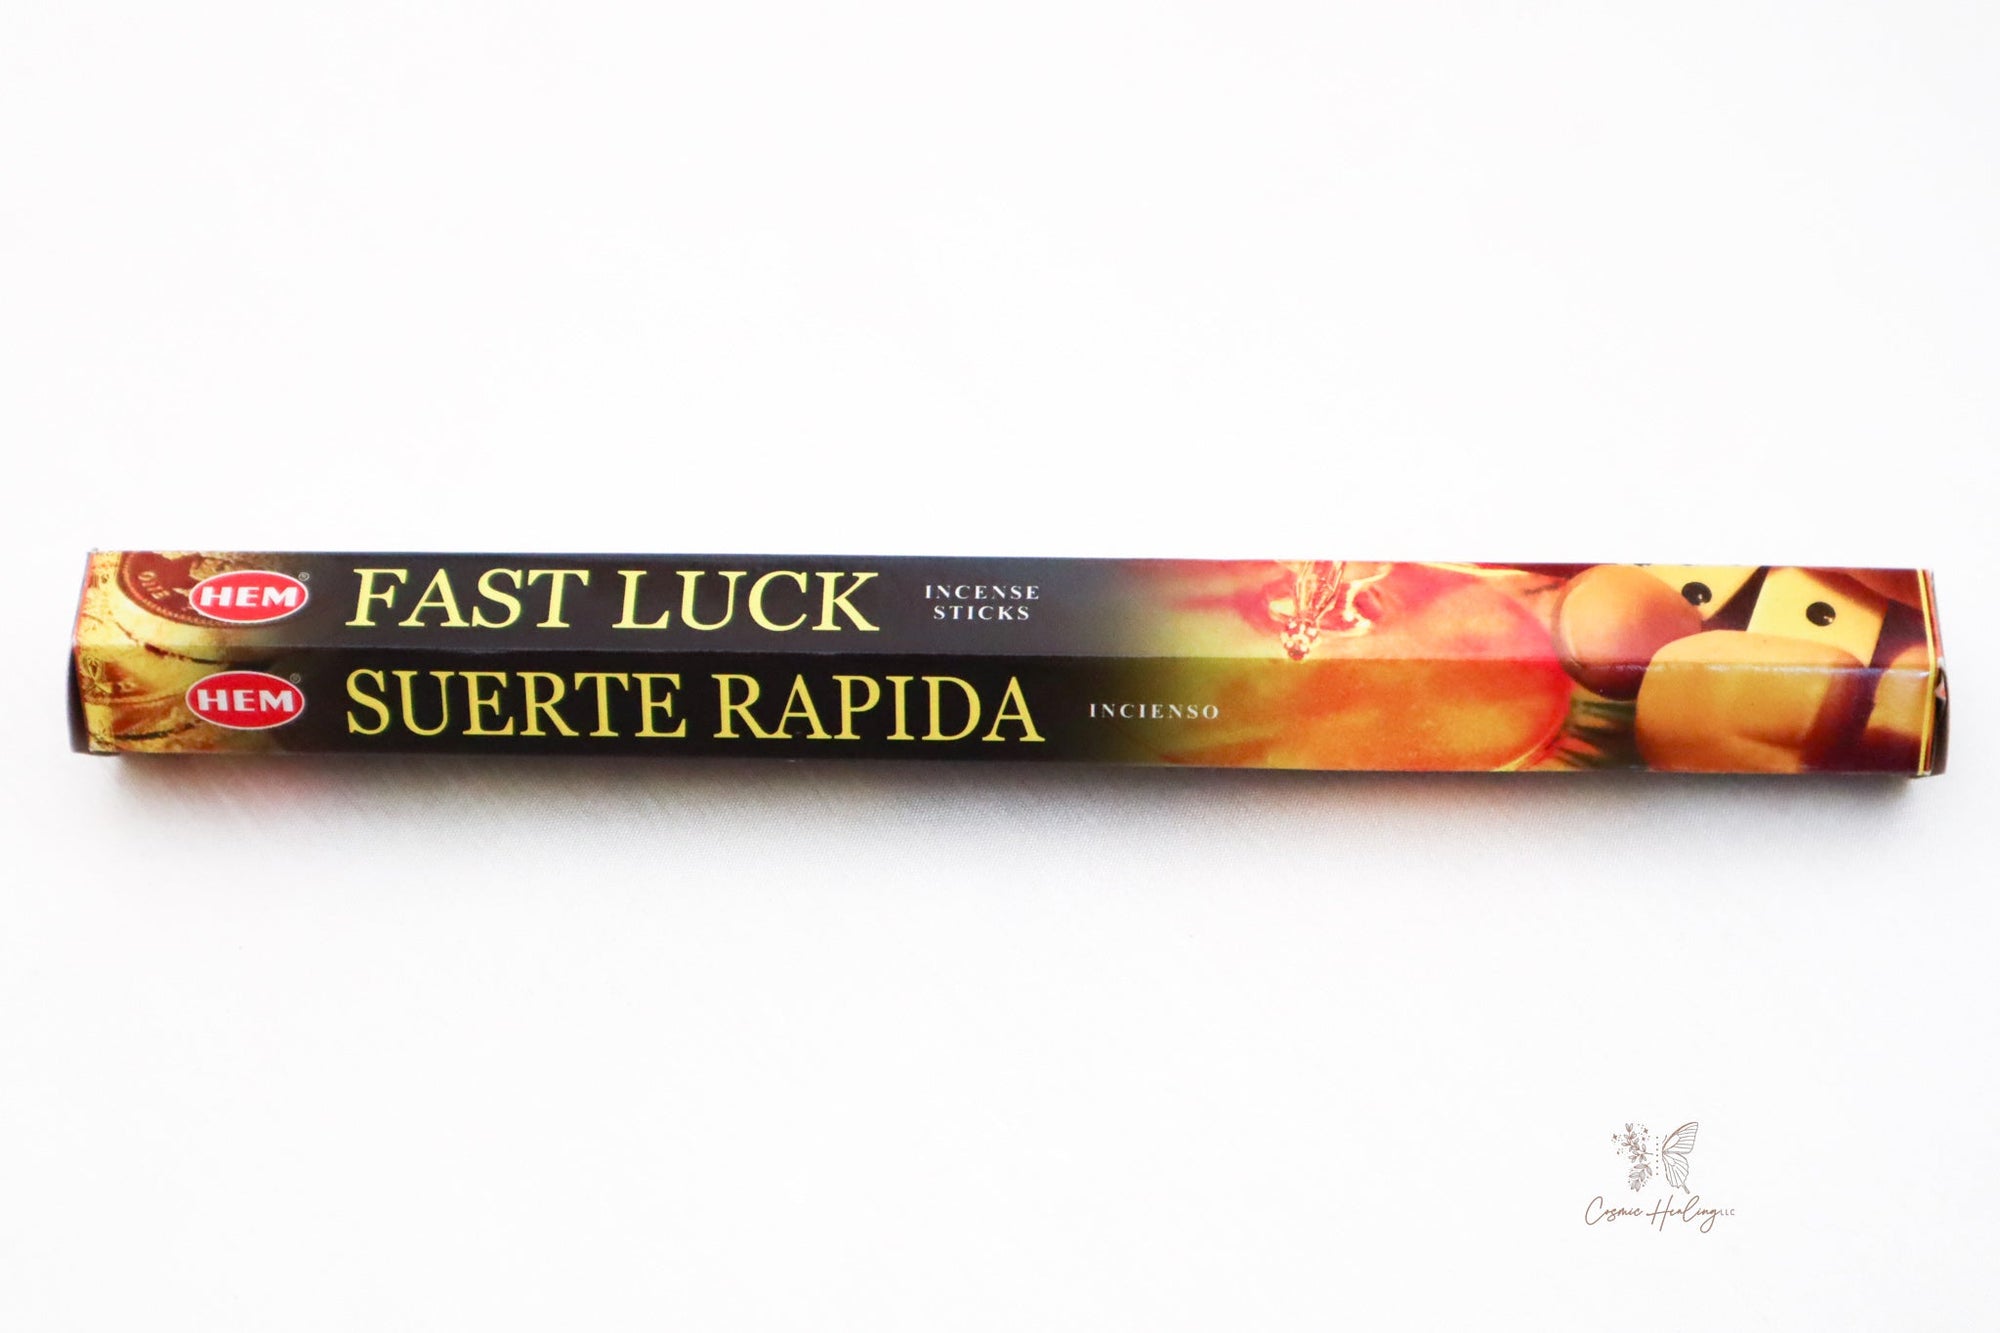 Fast Luck Incense- HEM (Suerte Rapida Incienso) to attract prosperity and good fortune your way - Shop Cosmic Healing